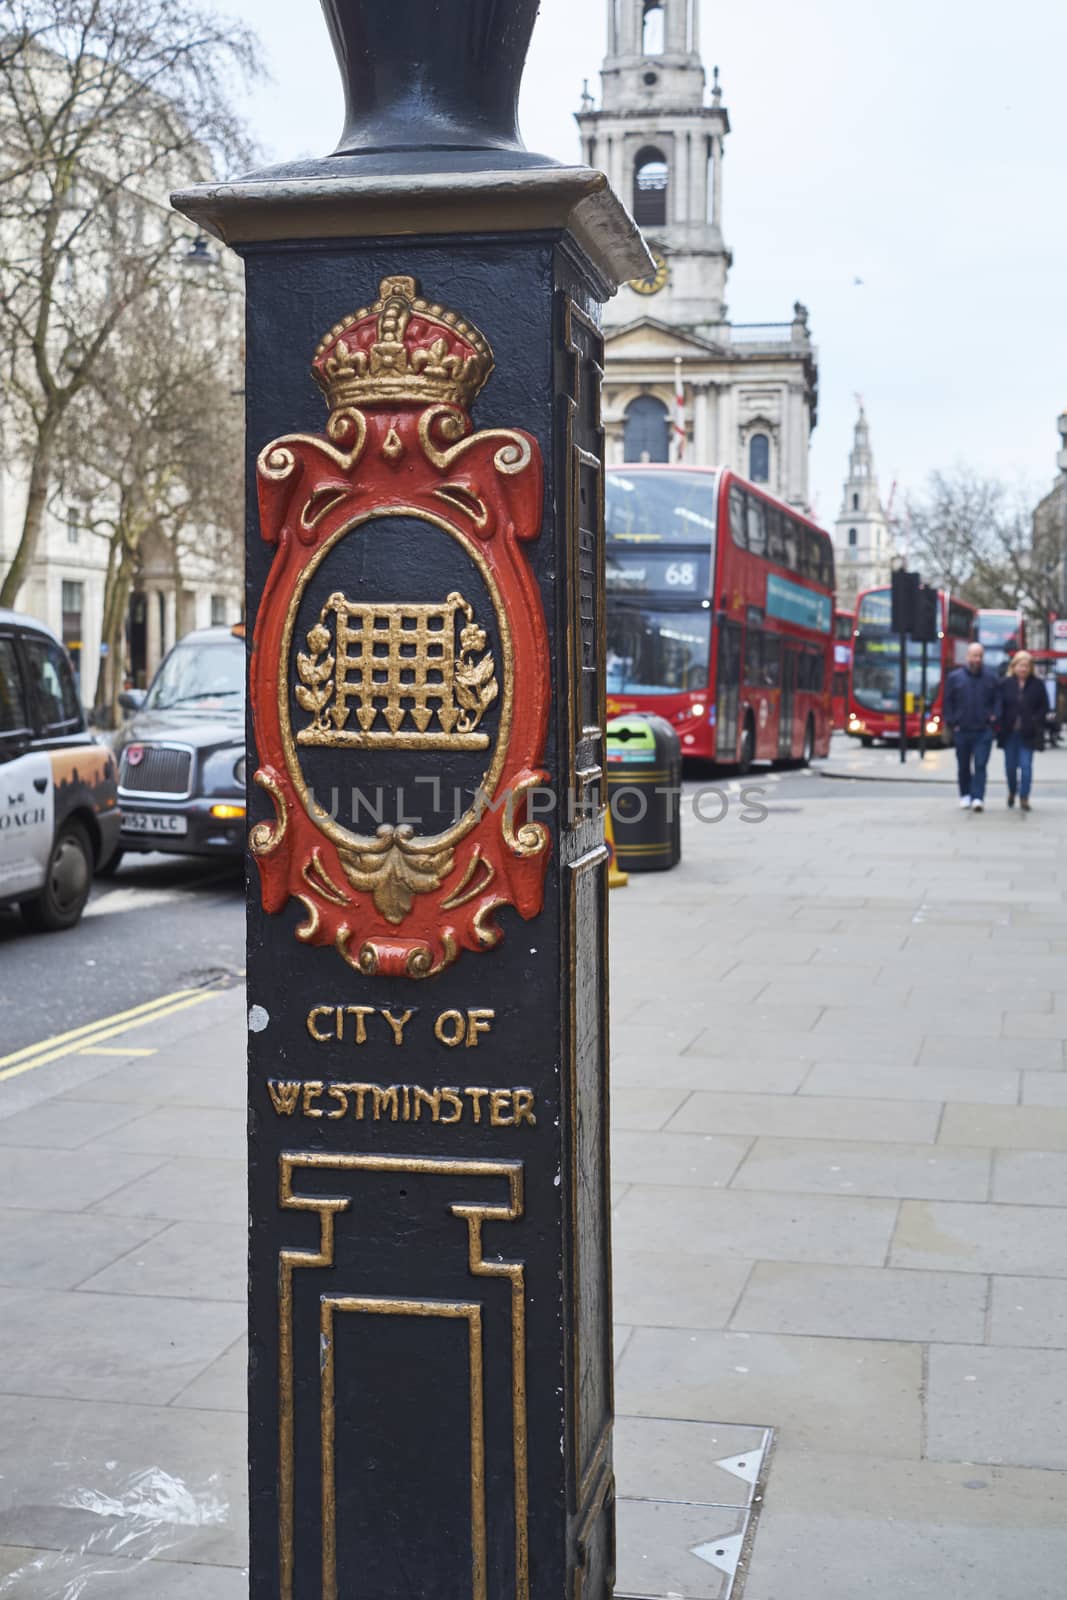 LONDON, UK - DECEMBER 20: Detail of light post in front of Sommerset House depicting the City of Westminster coat of arms and red double-decker bus in the background. December 20, 2015 in London.